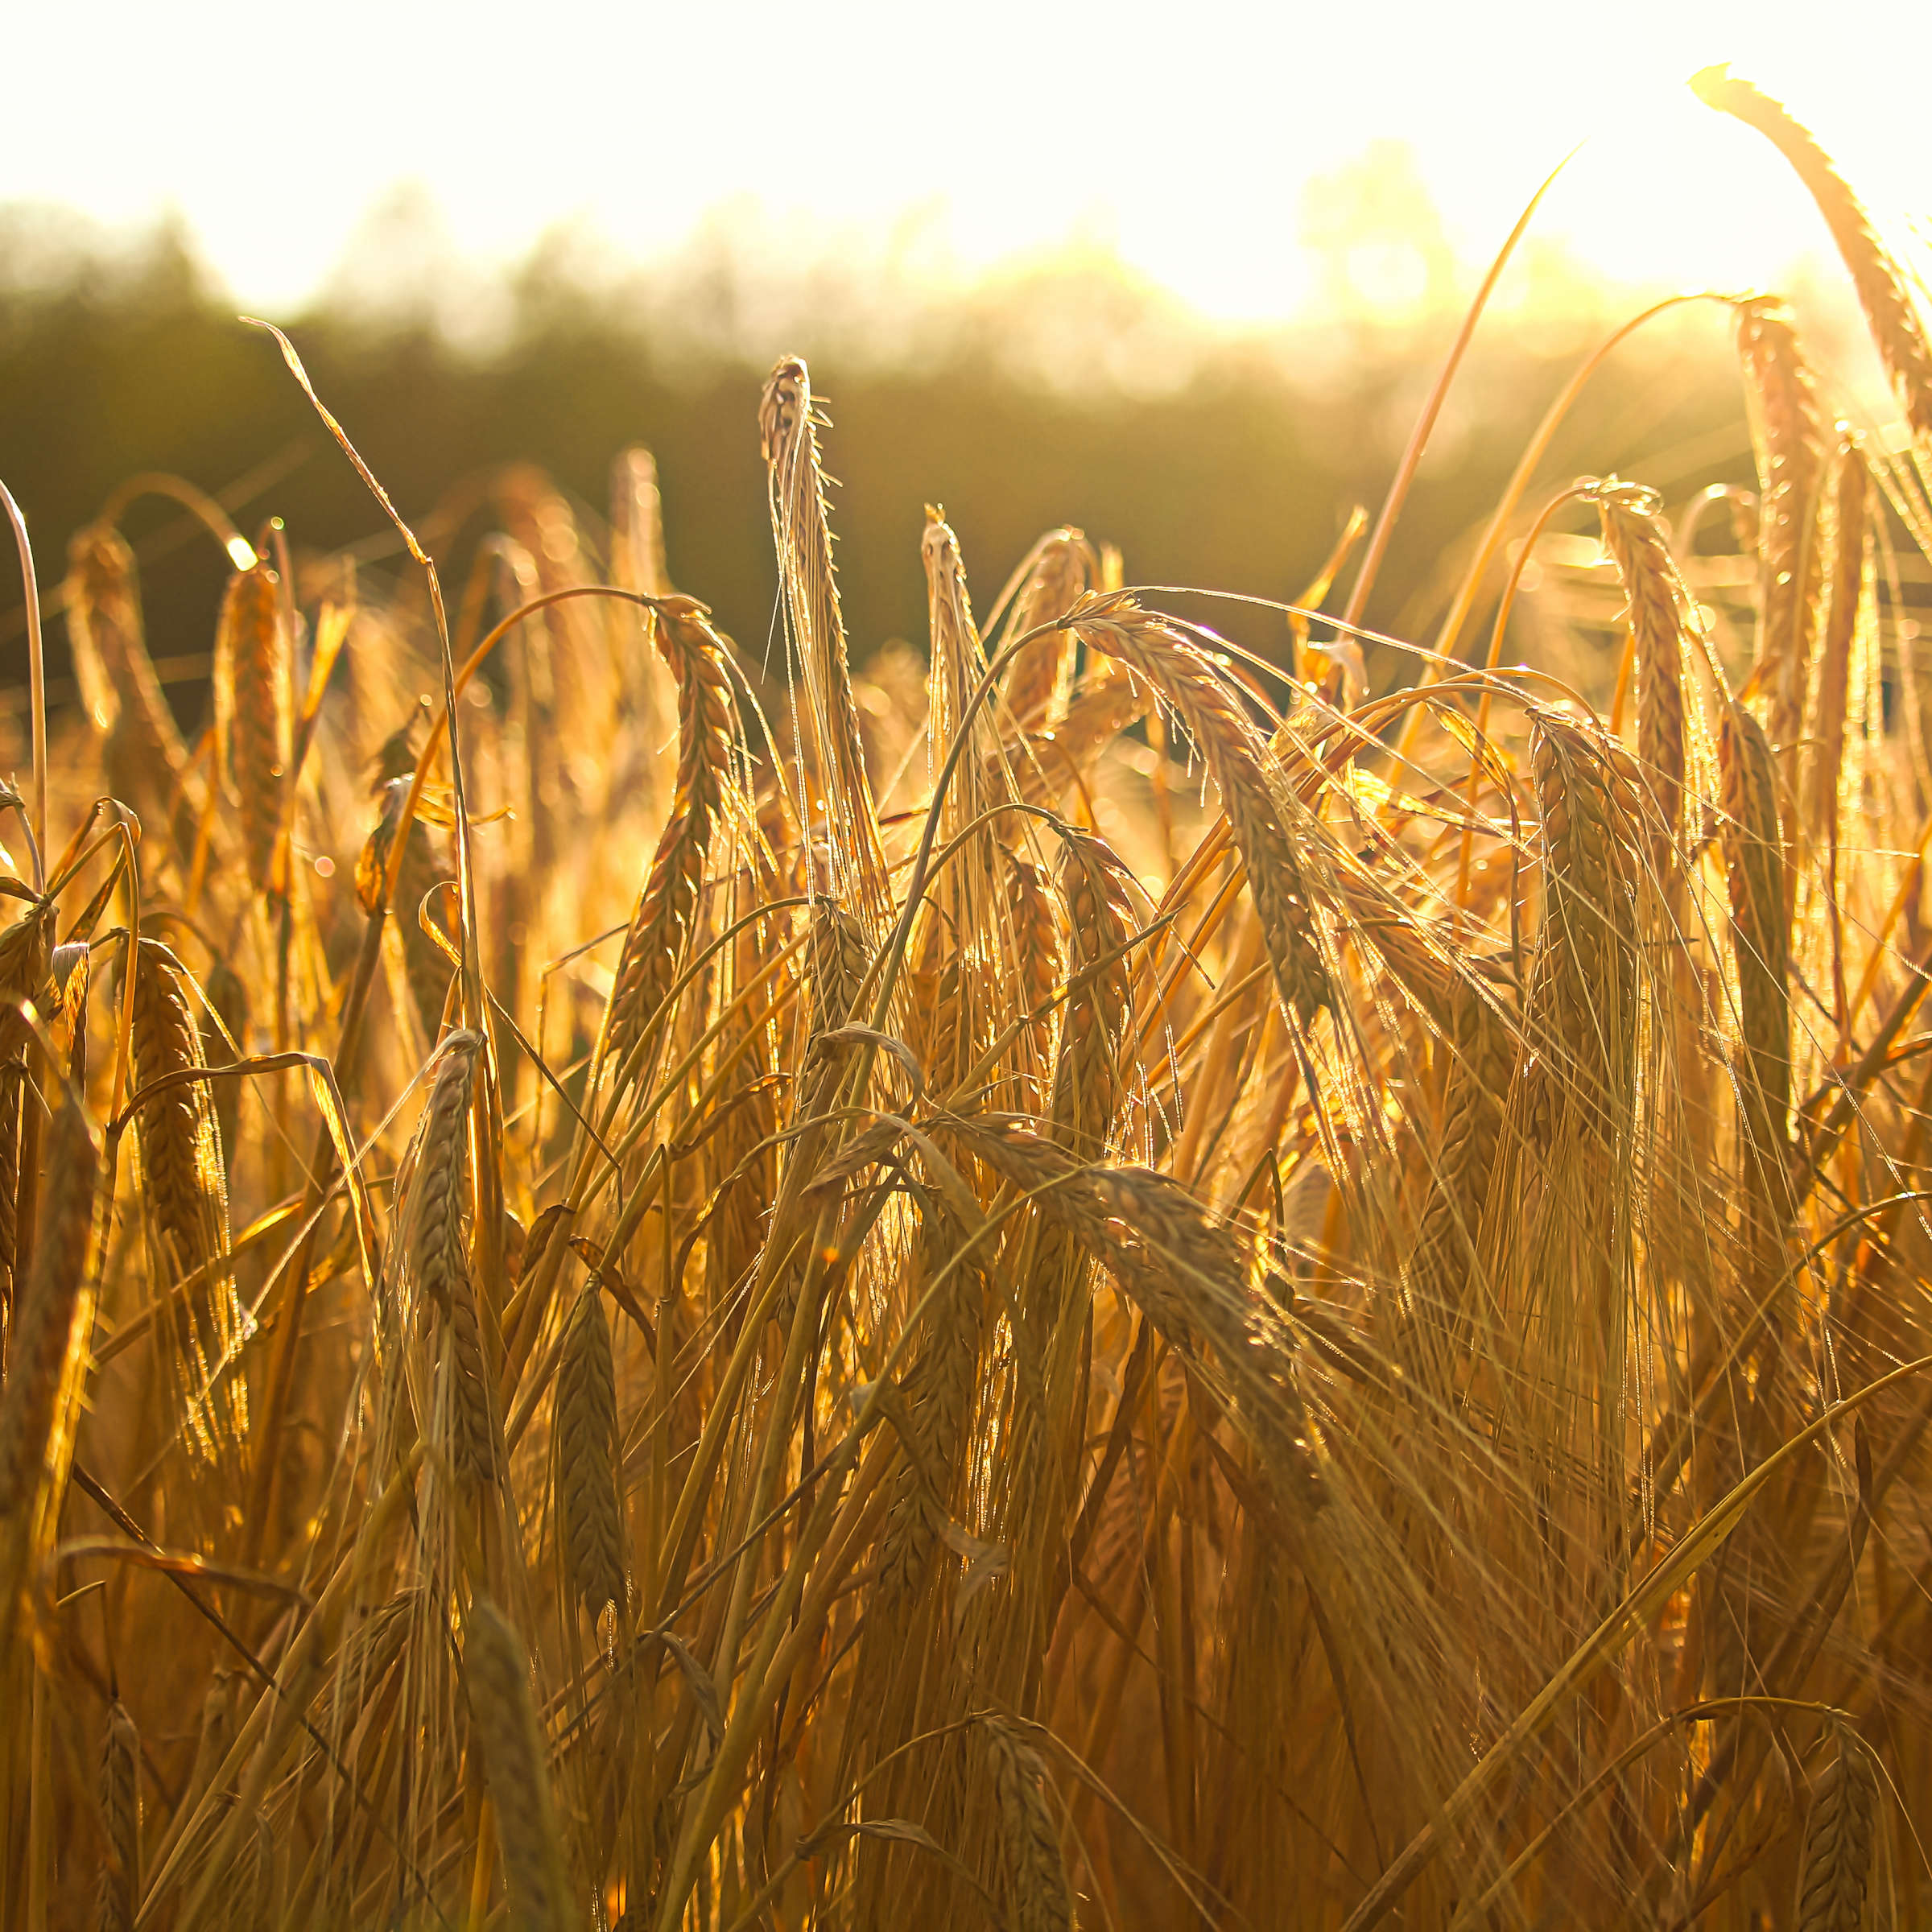 Dried yellow barley stalks with their seed heads drooping stand in the glowing sunlight. Photo: Akchamczuk / iStock.